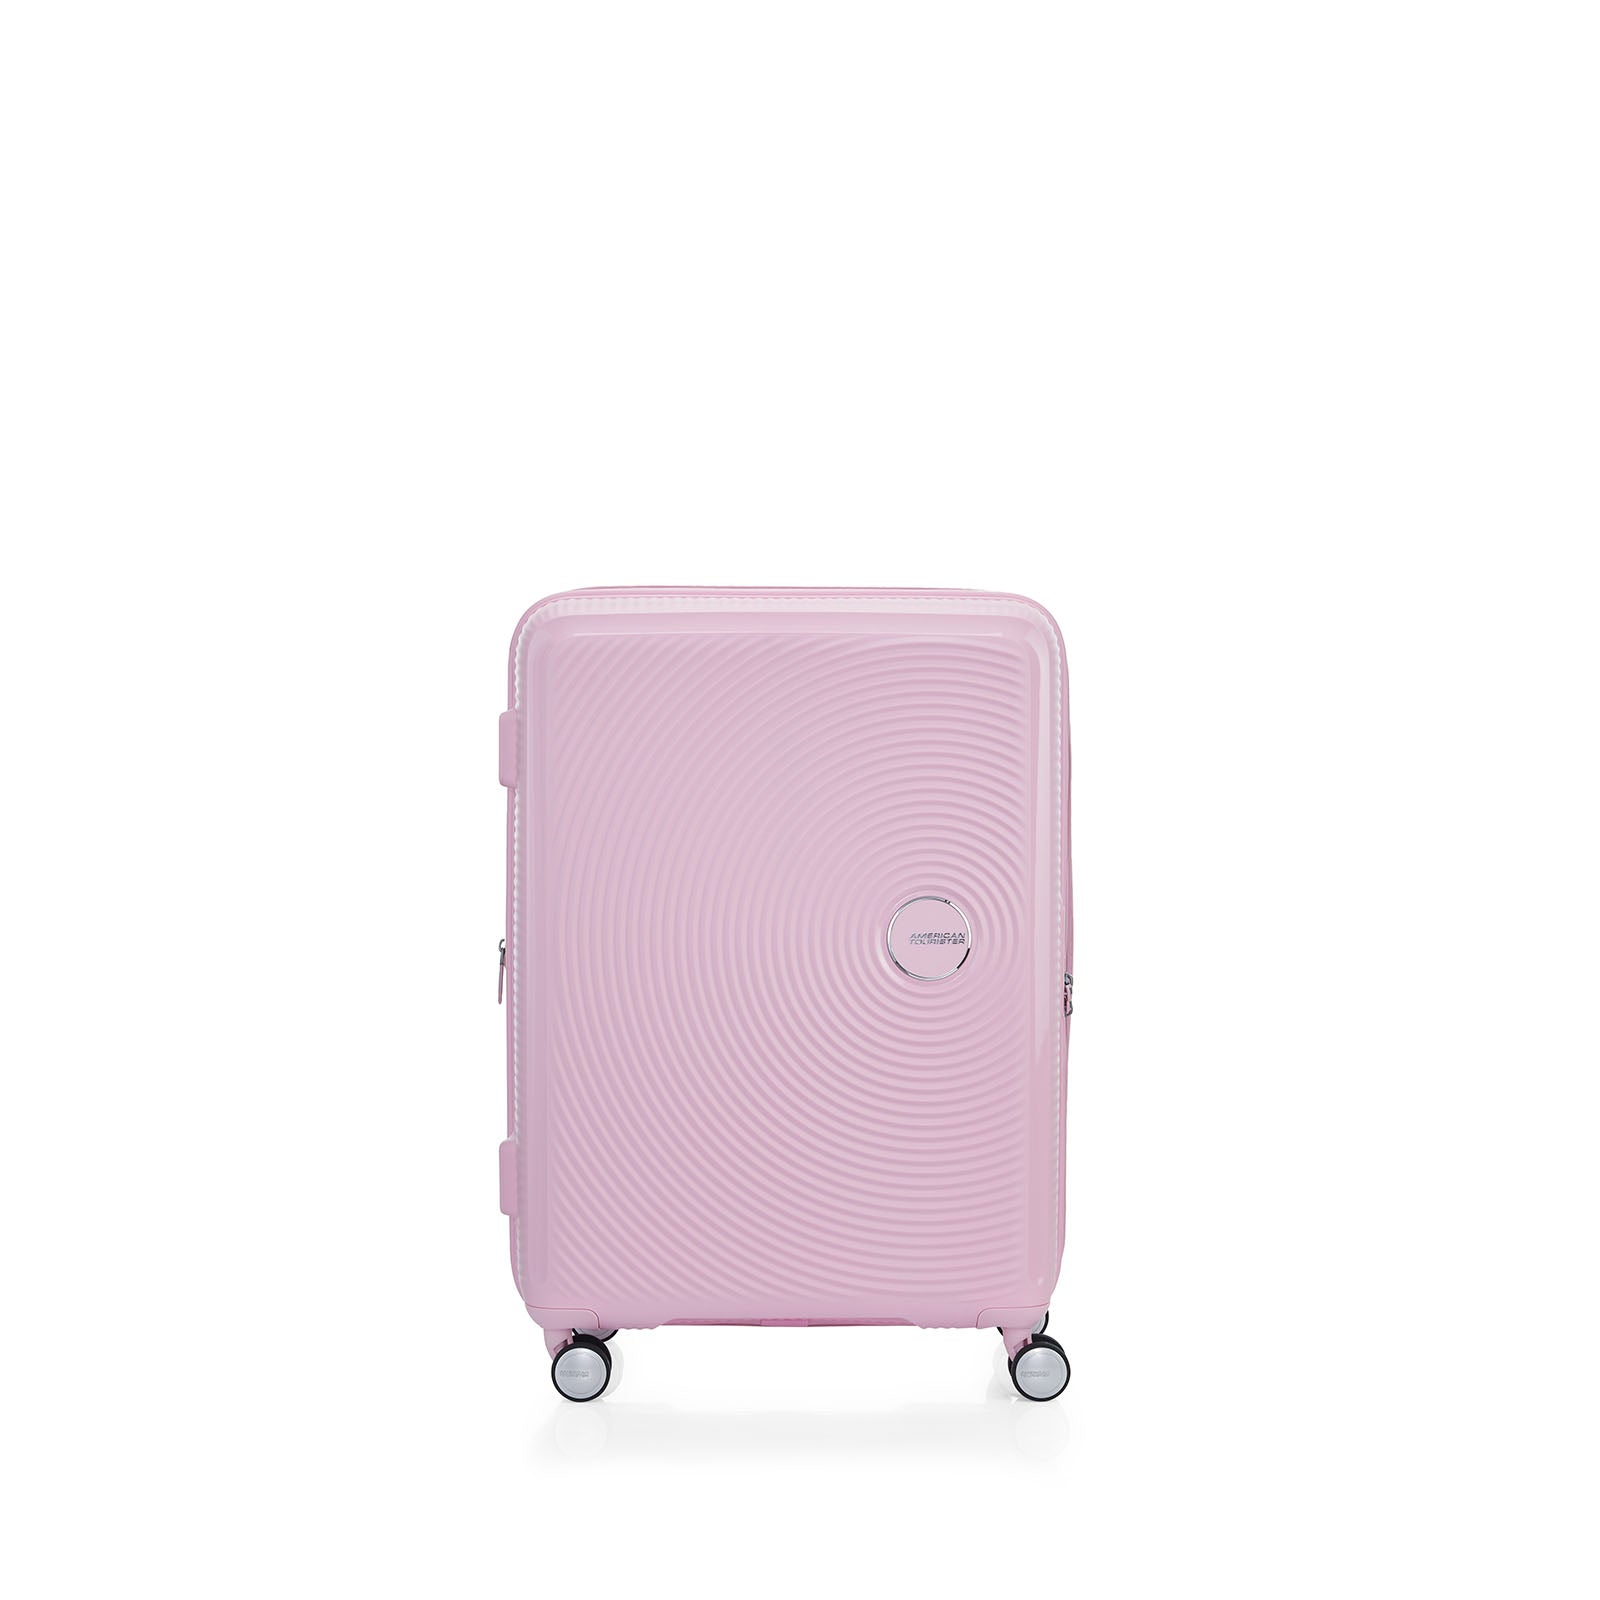 American-Tourister-Curio-2-69cm-Suitcase-Fresh-Pink-Front